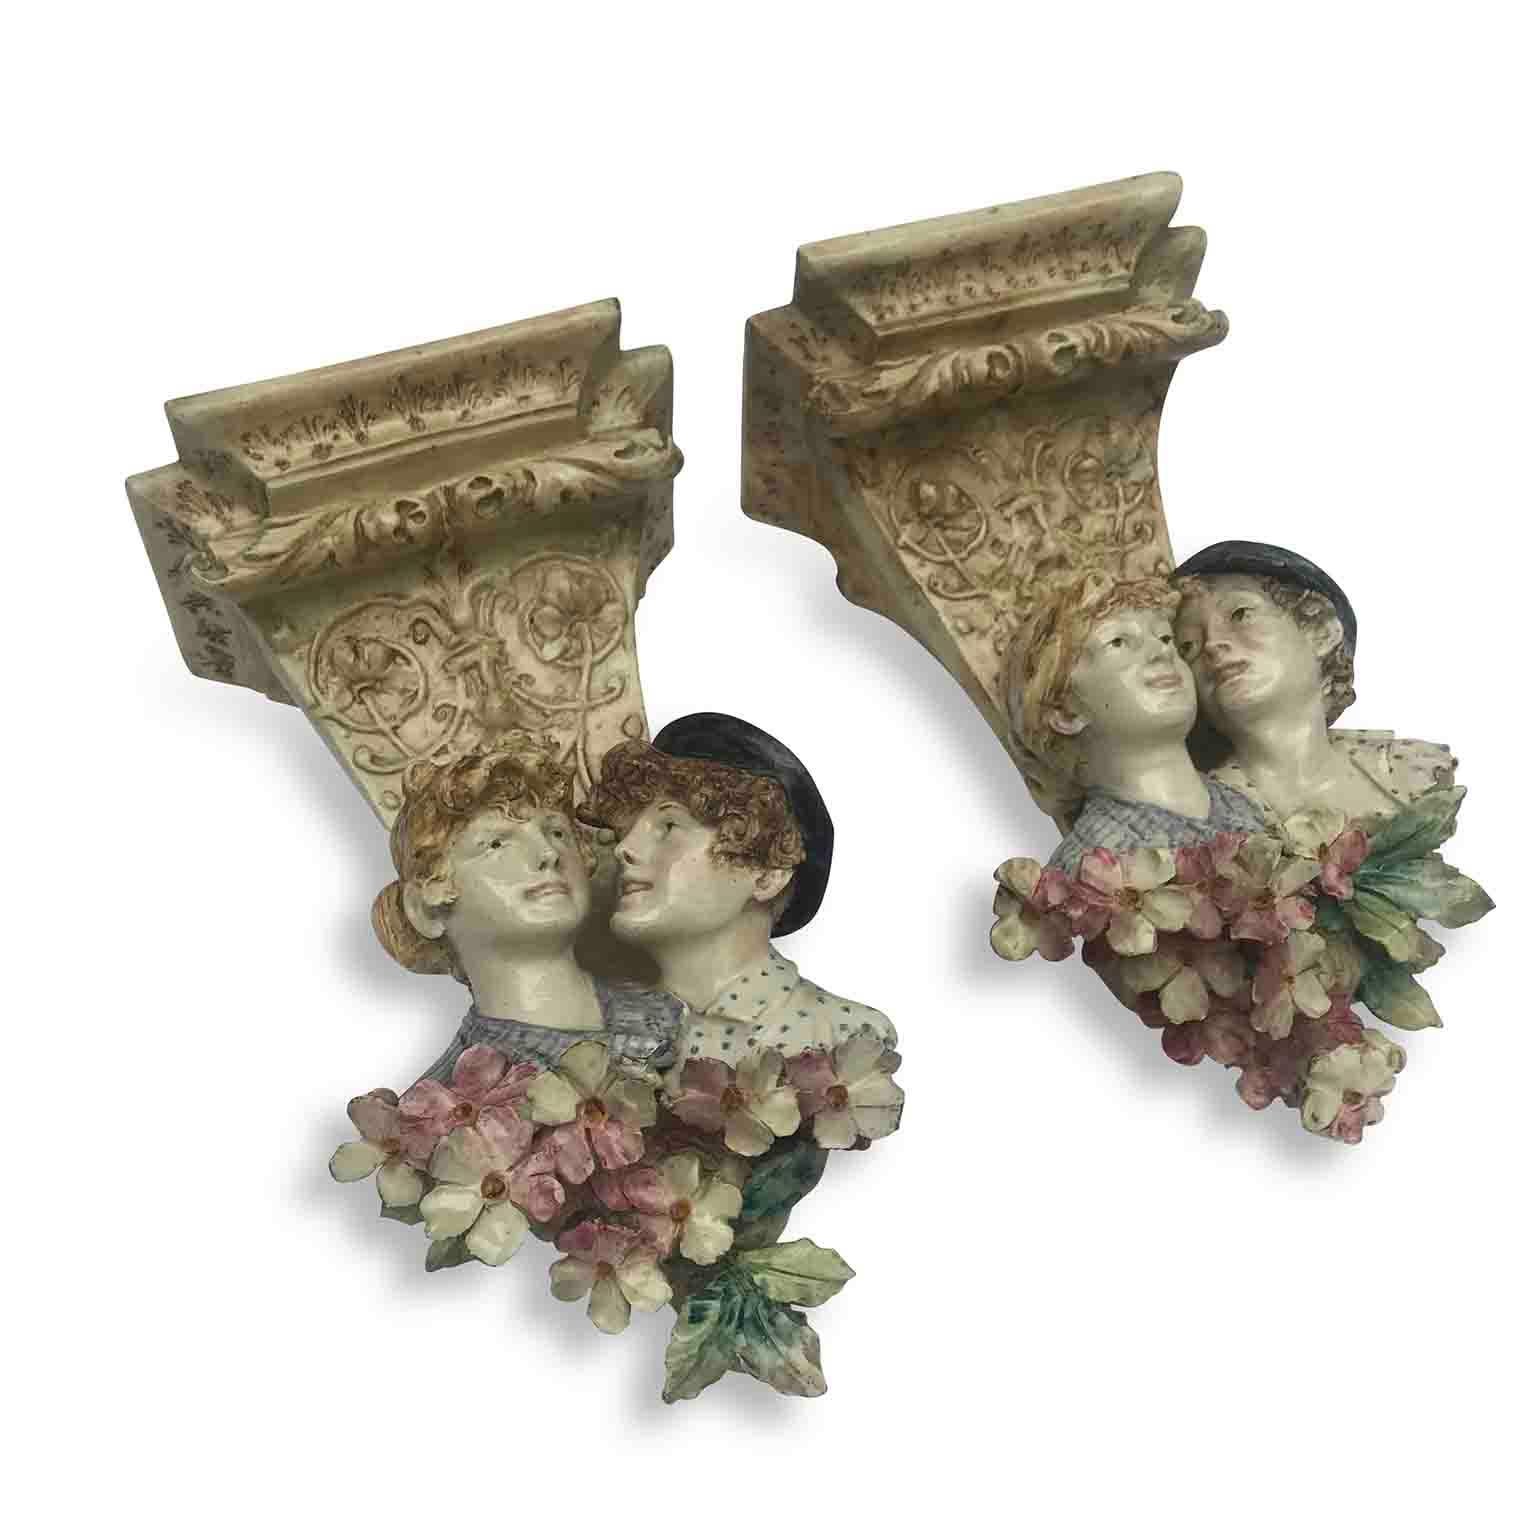 Pair of 20th century Art Nouveau Italian wall brackets, two hand-modeled, hand painted ceramic brackets with a fine polychrome decoration with half-bust girl and boy figures and flowers. 
They are a Northern Italy manufacture, unmarked, dating back